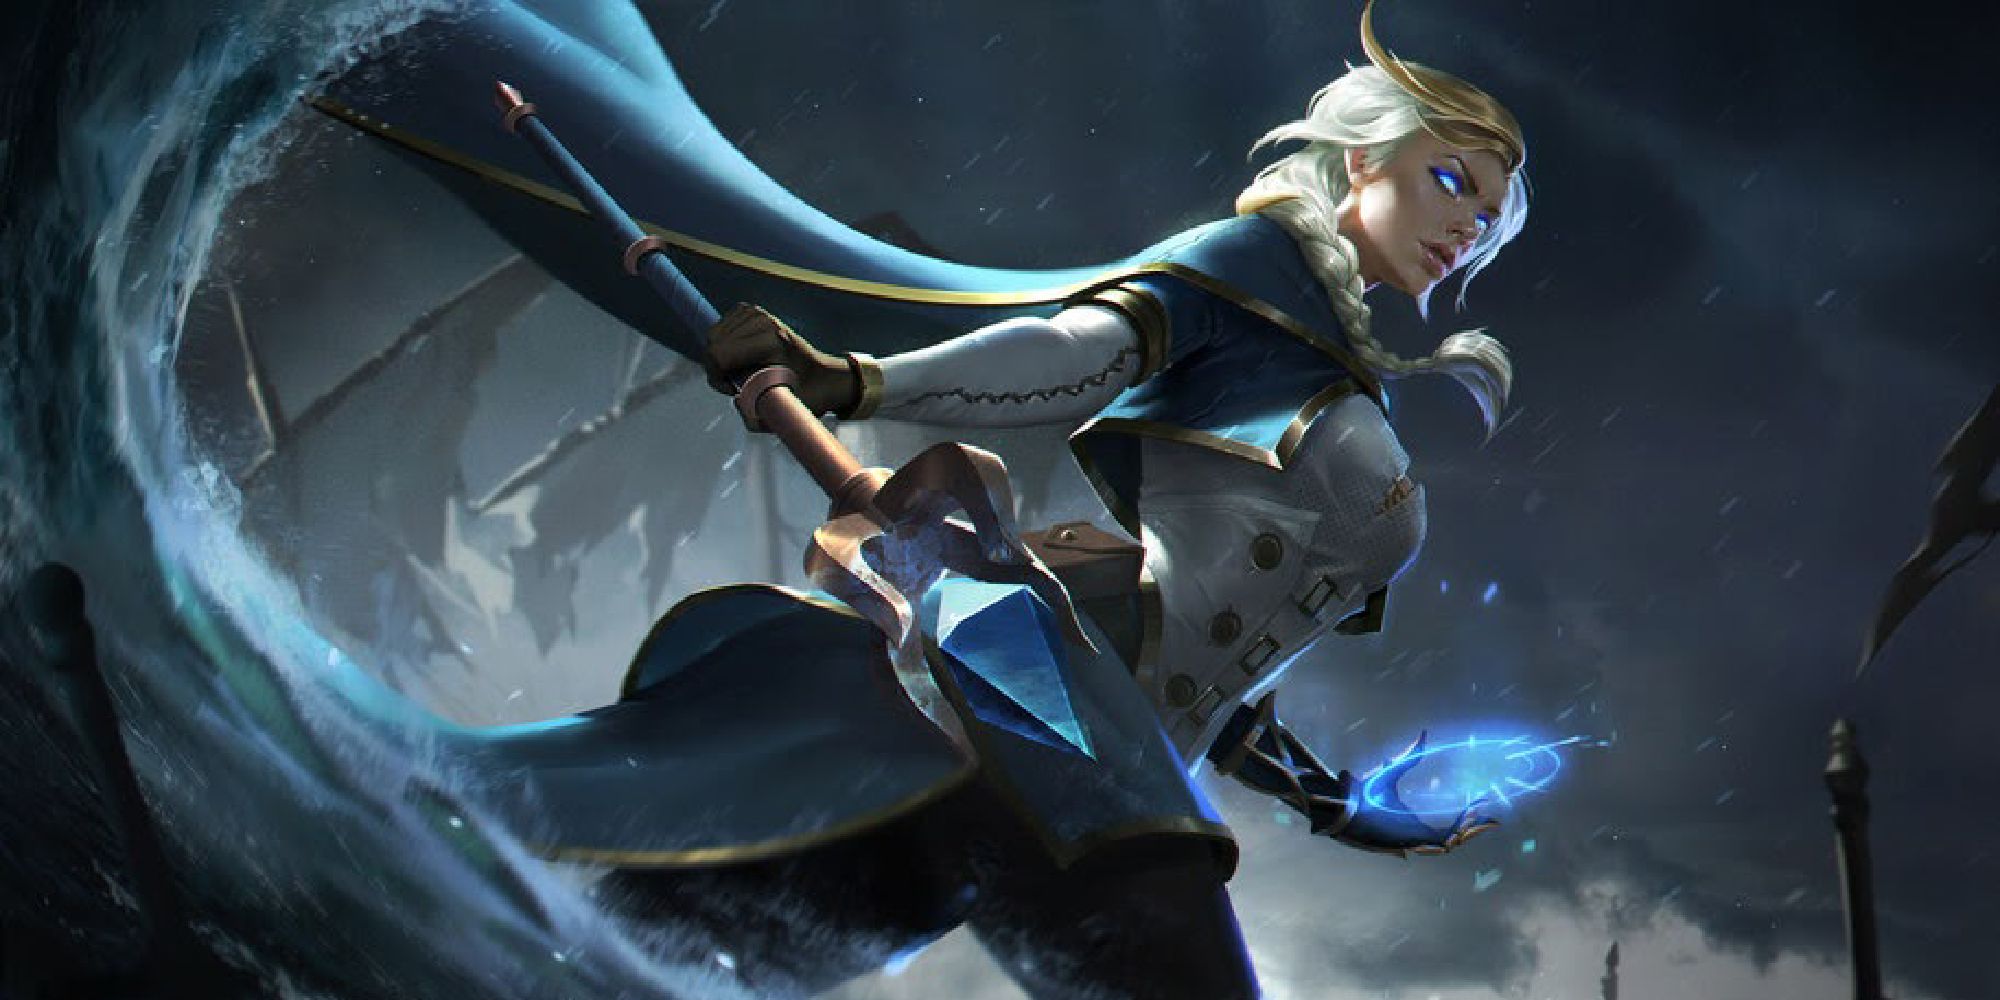 Jaina Proudmoore from WoW posing in front of icy background